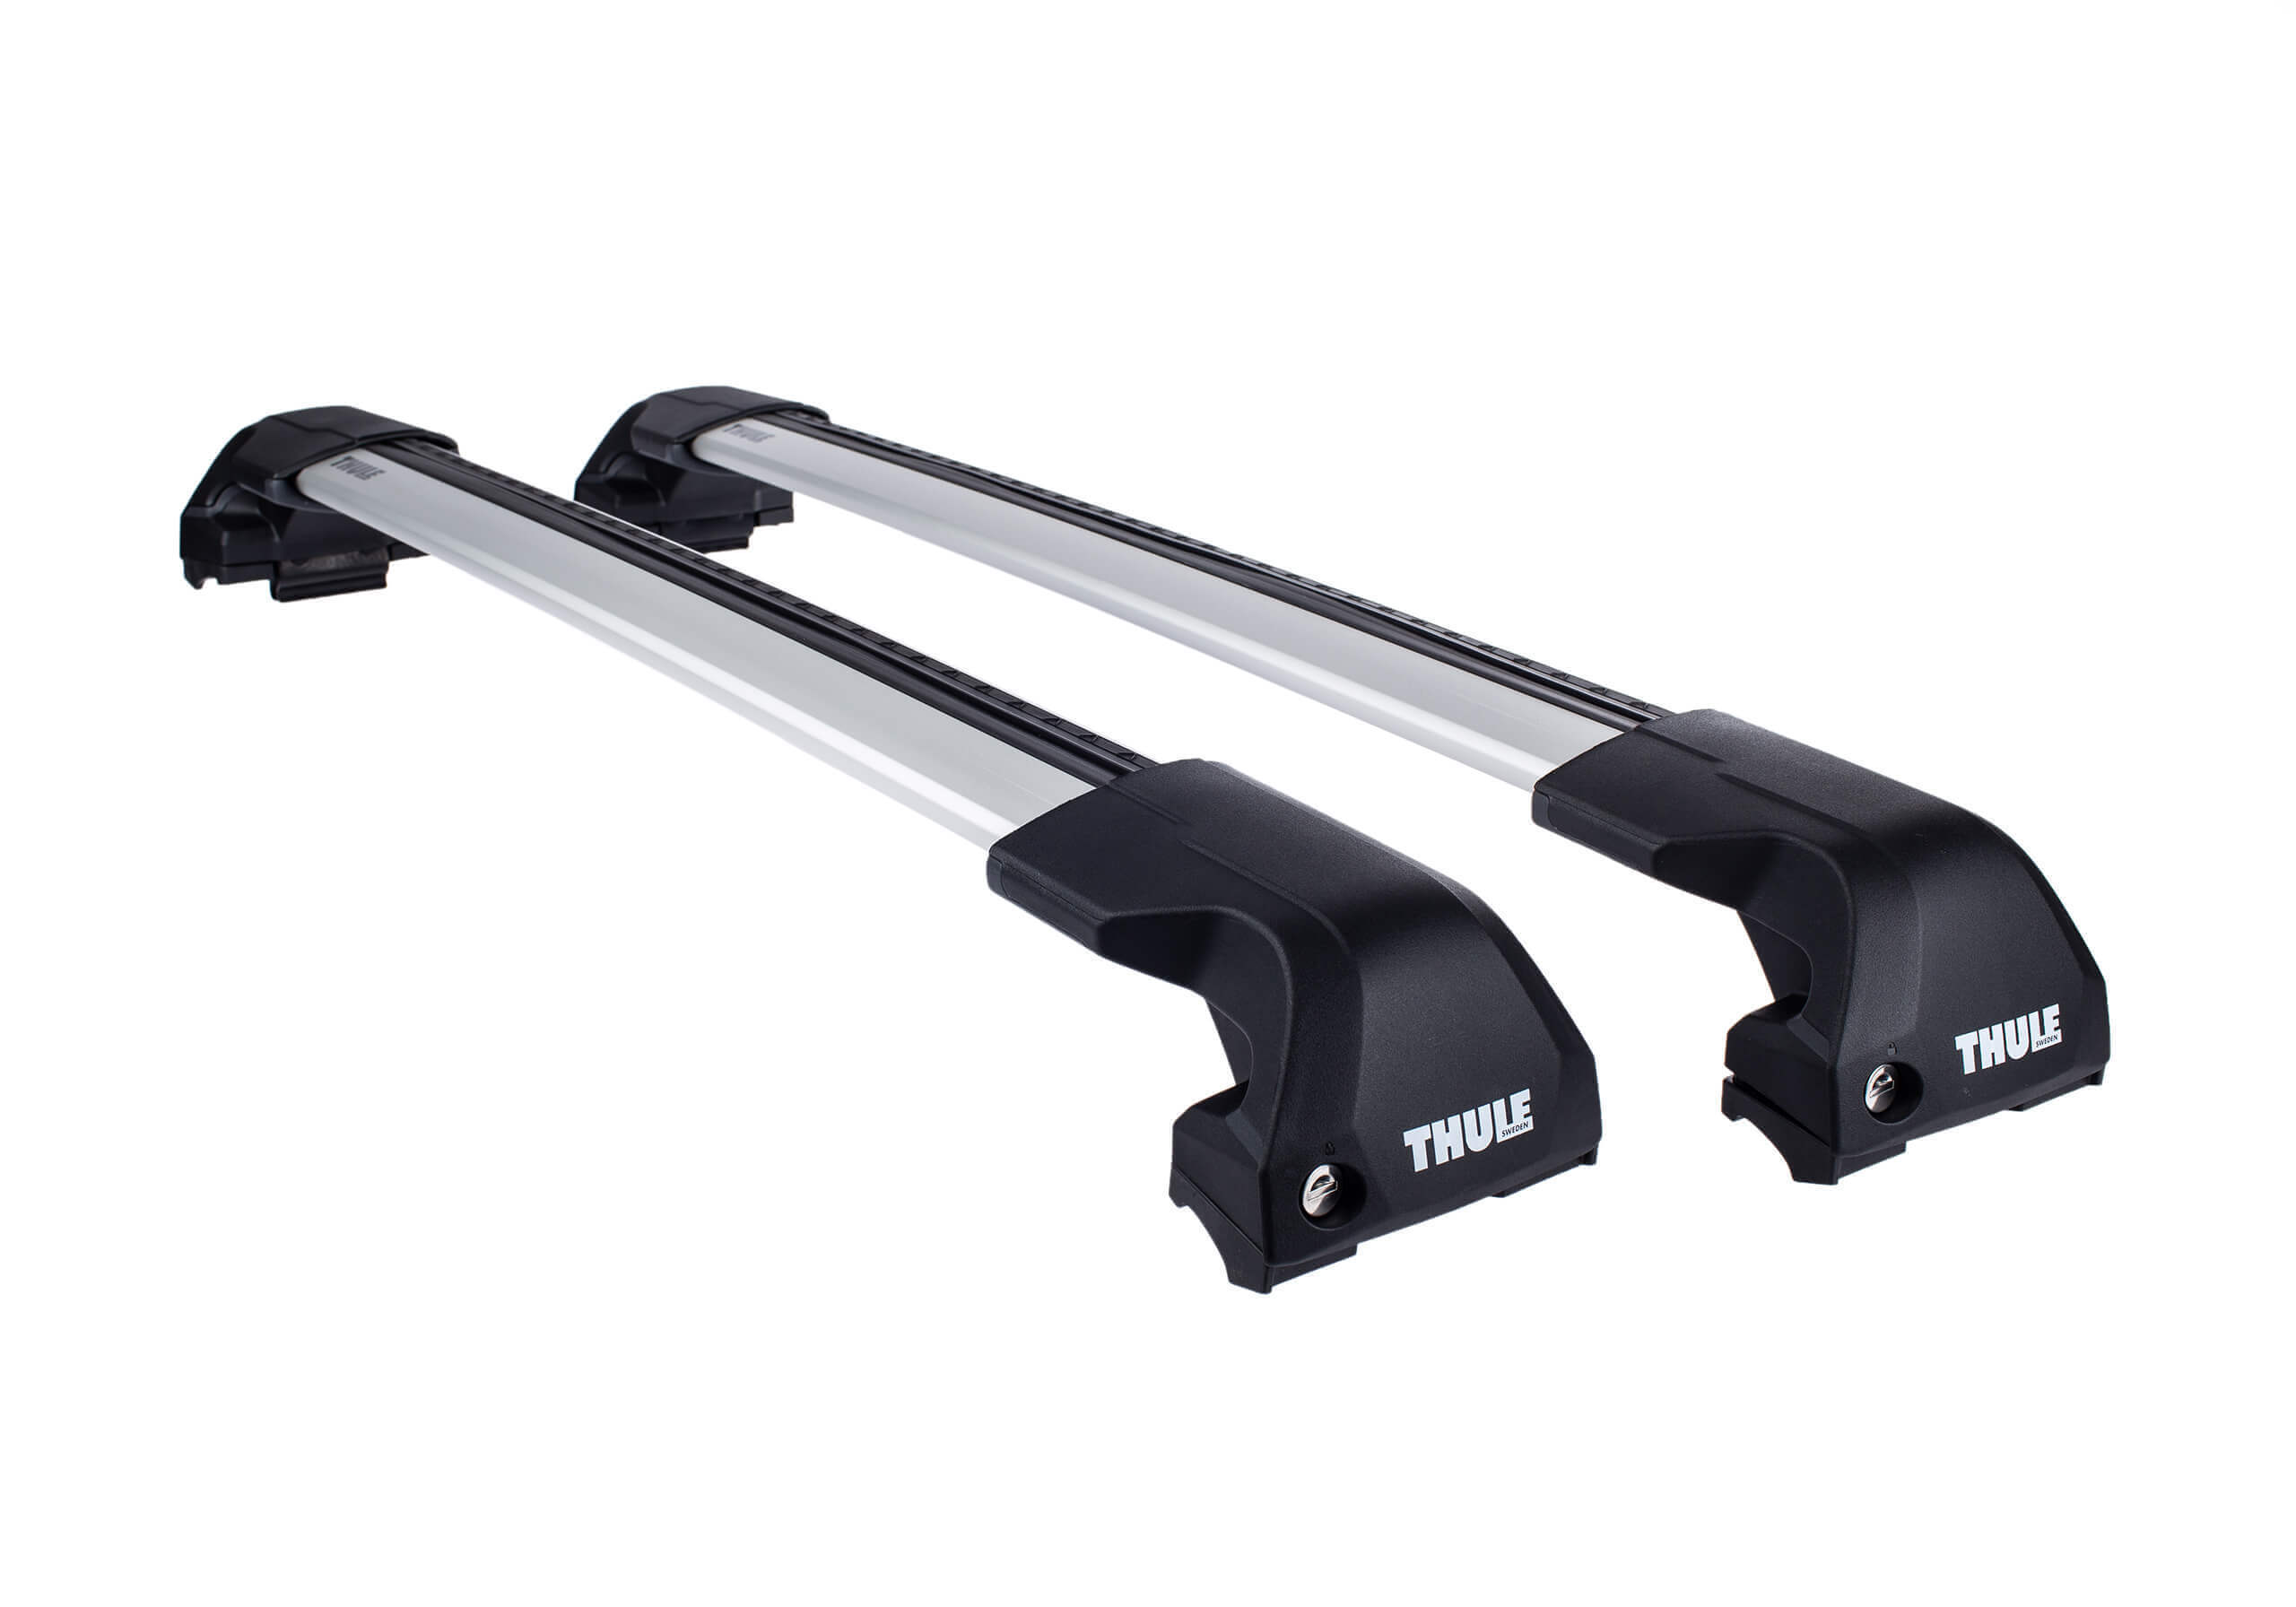 Volkswagen VW Golf estate (2013 to 2020):Thule Edge silver WingBars package - 7206, 7212 x 2, 6078